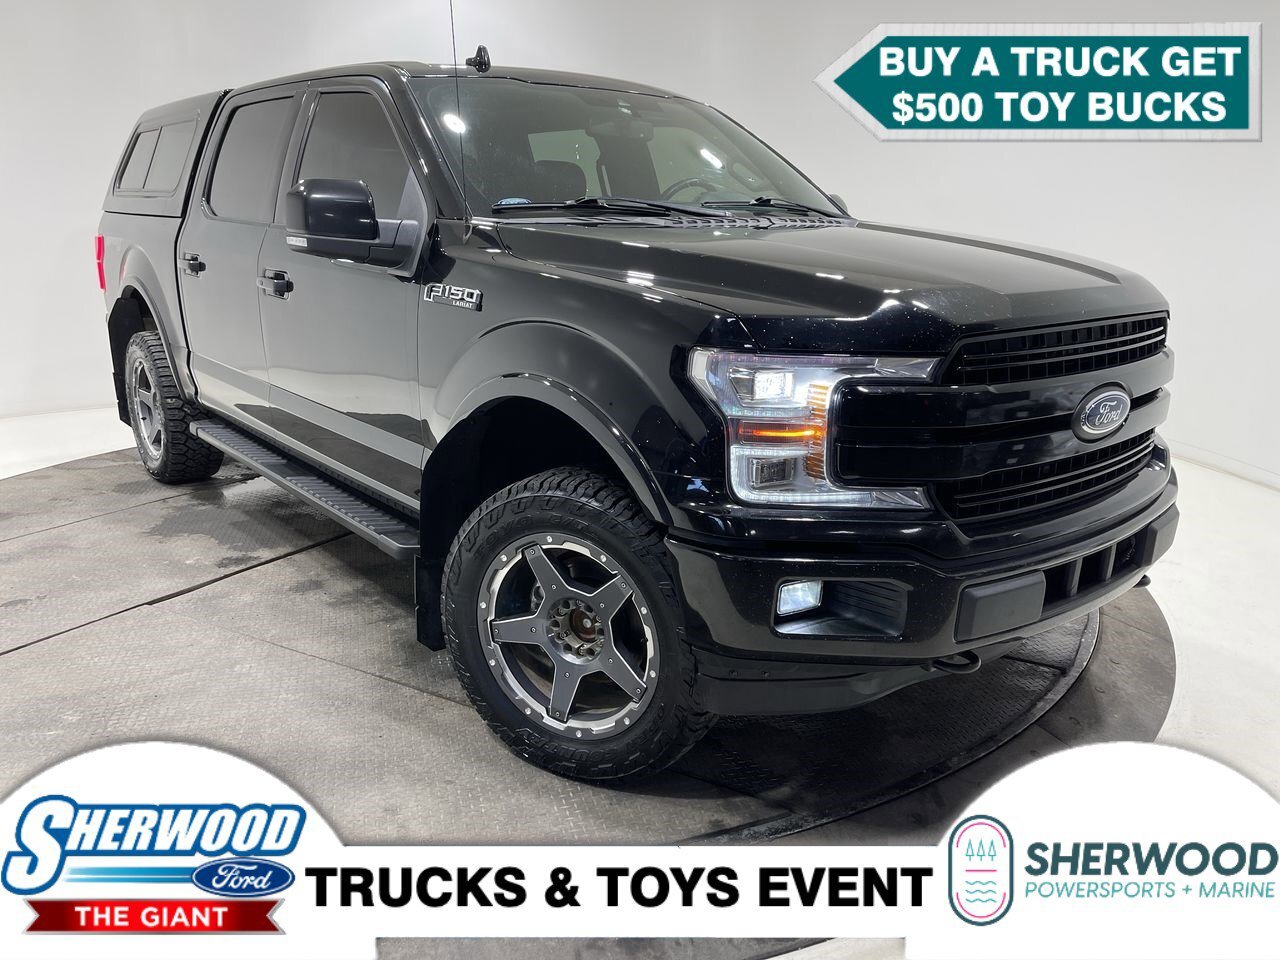 2018 Ford F-150 Lariat - $0 Down $153 Weekly - CLEAN CARFAX